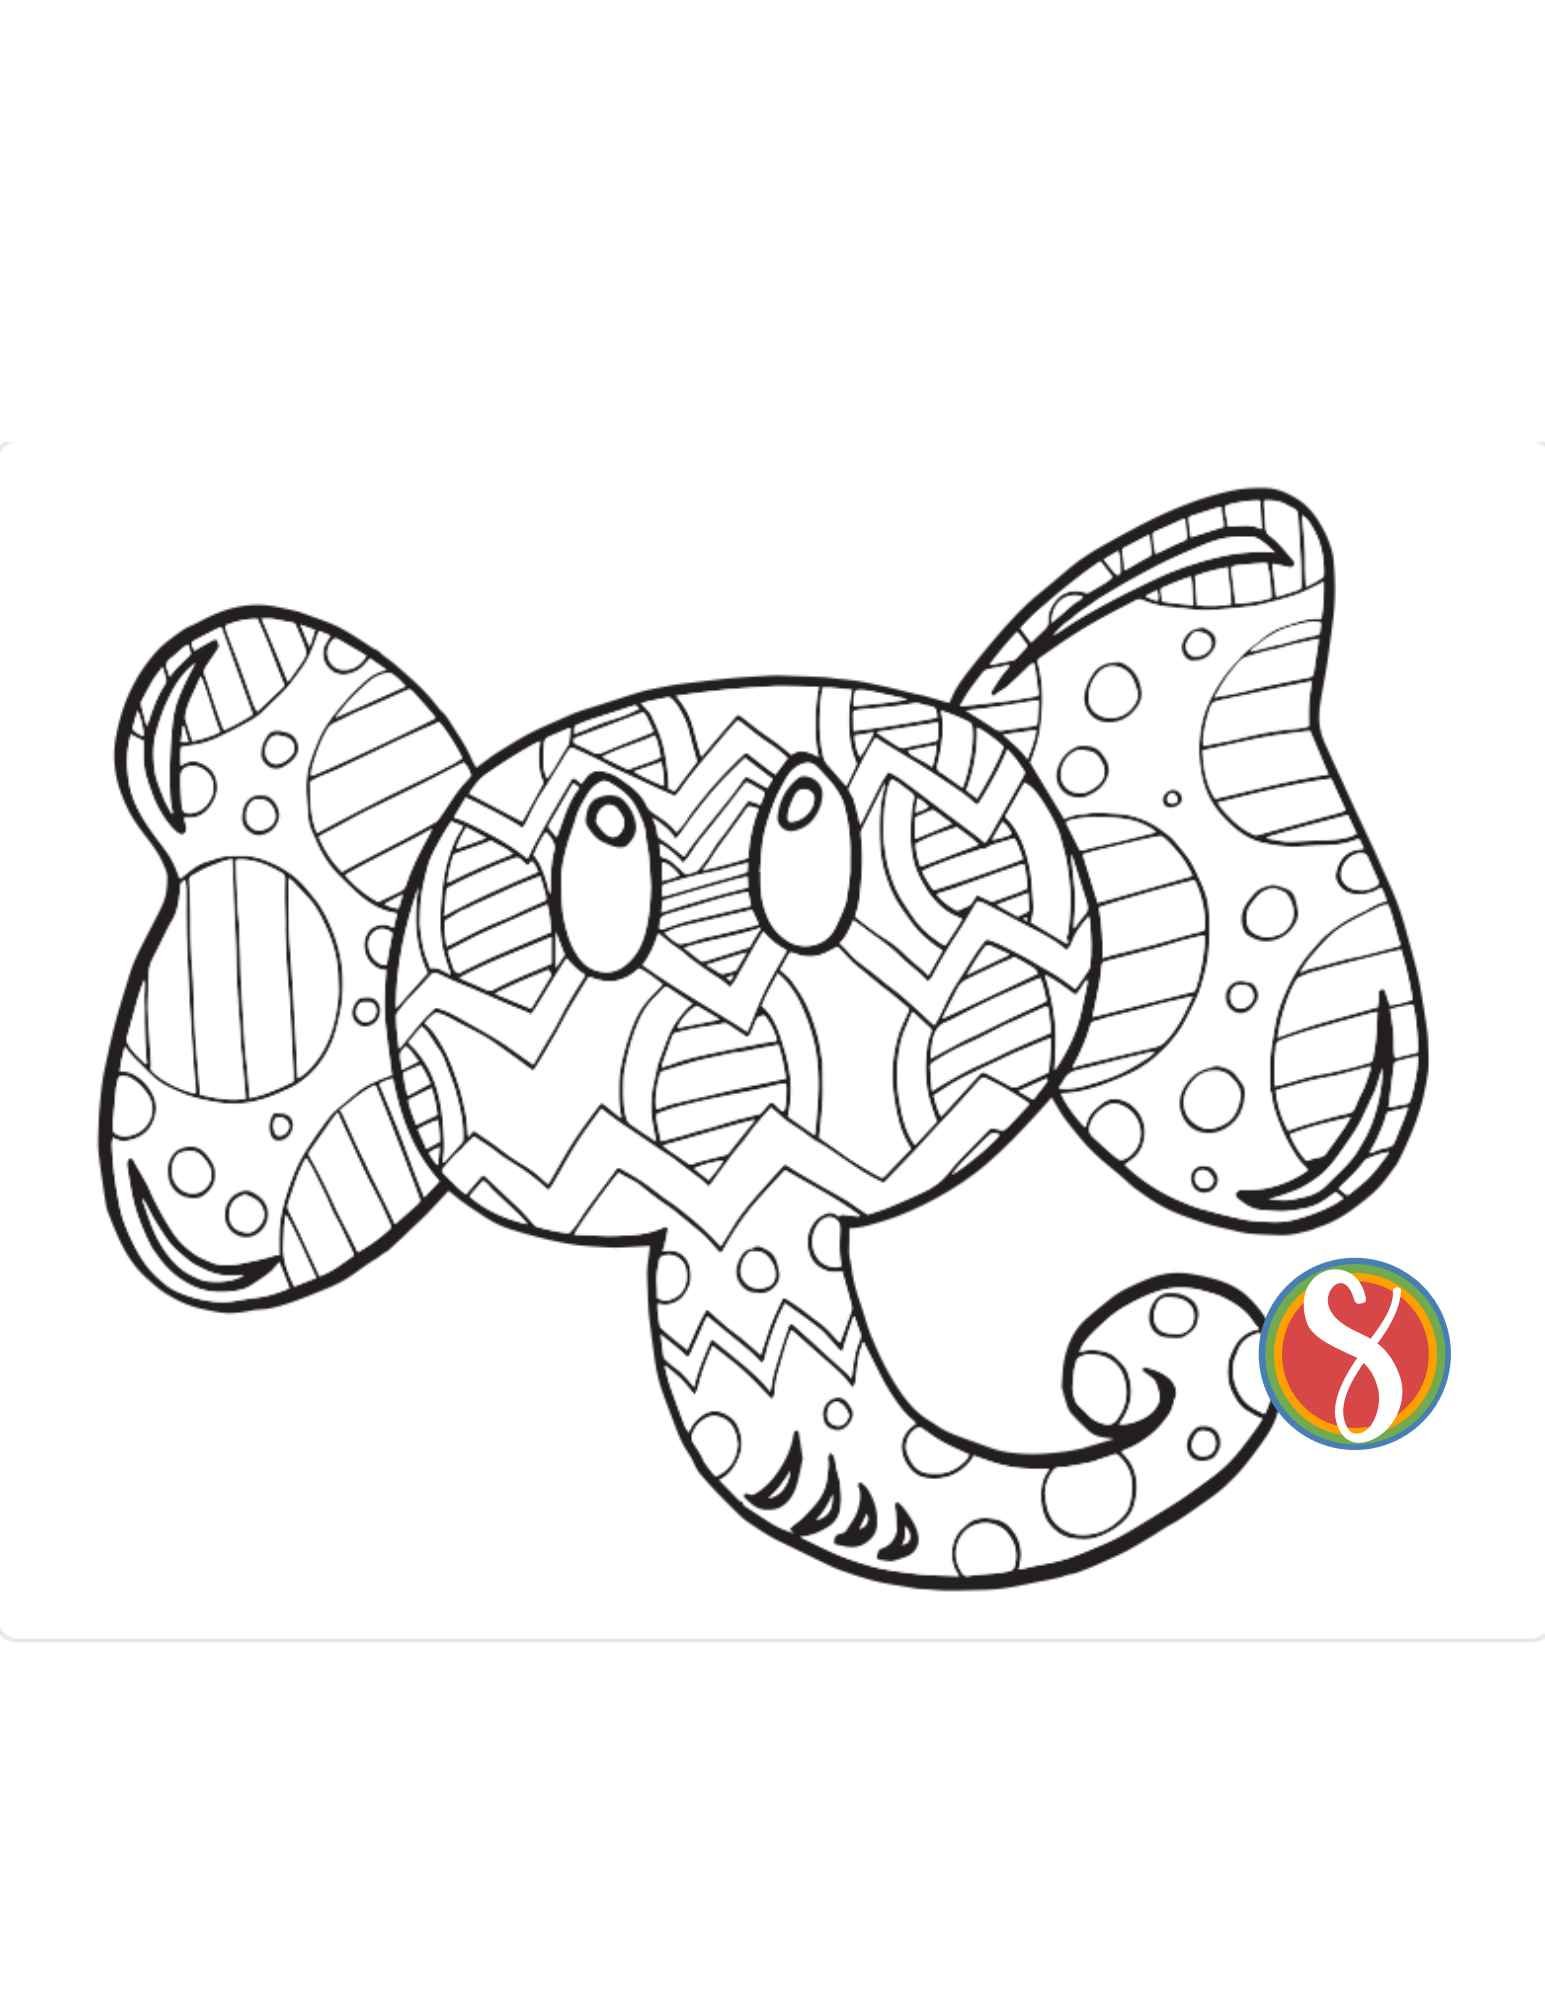 elephant color page with line art elephant head full of doodles to color